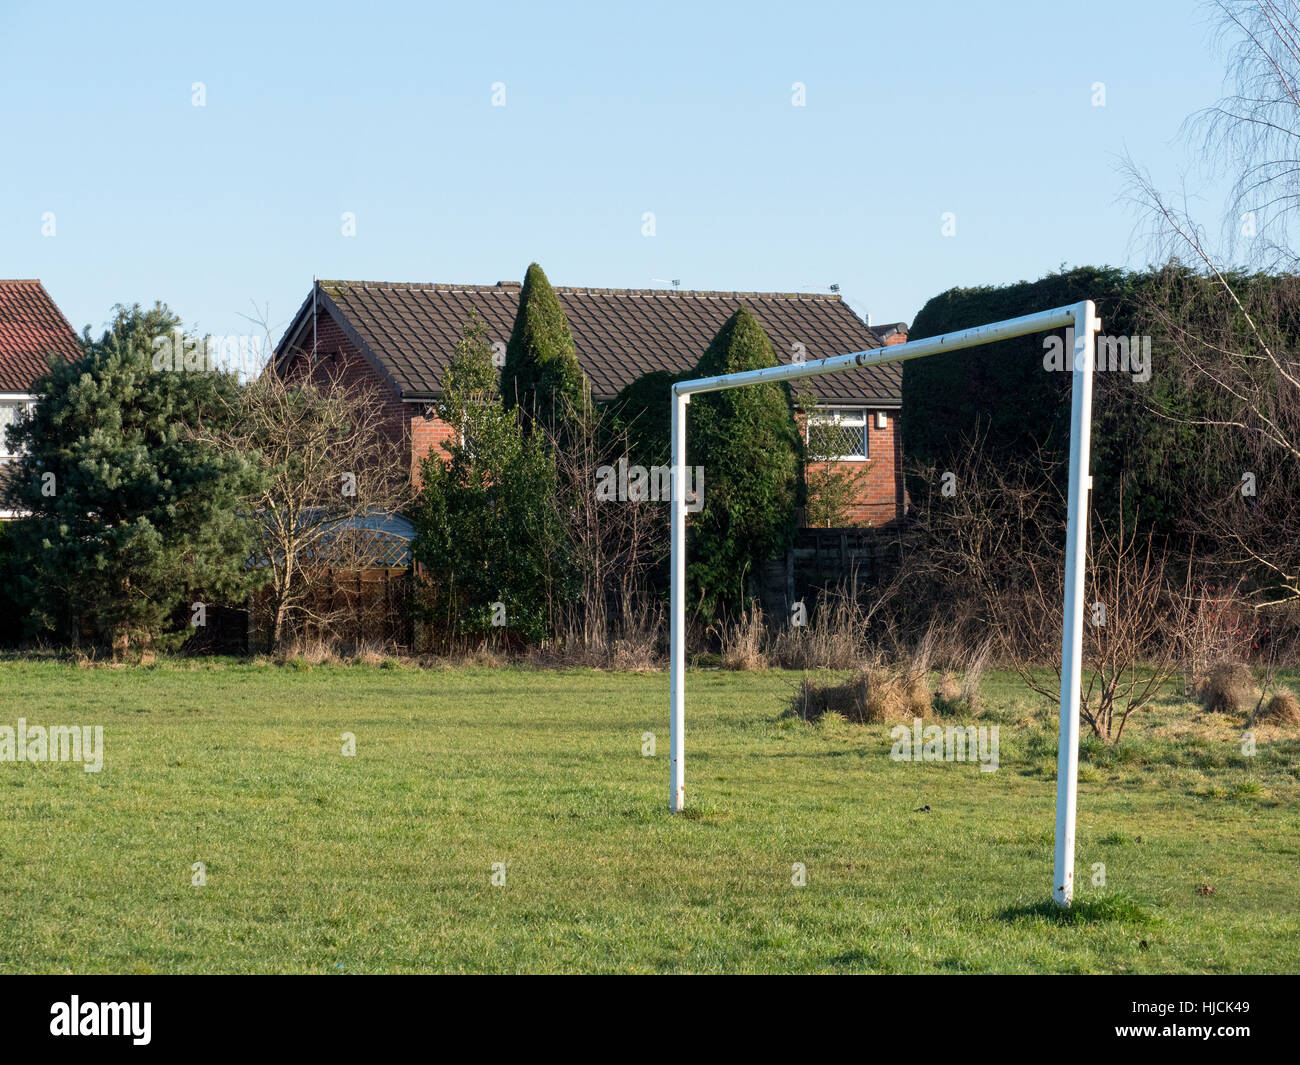 a goal post in a public park in Manchester, england. Stock Photo